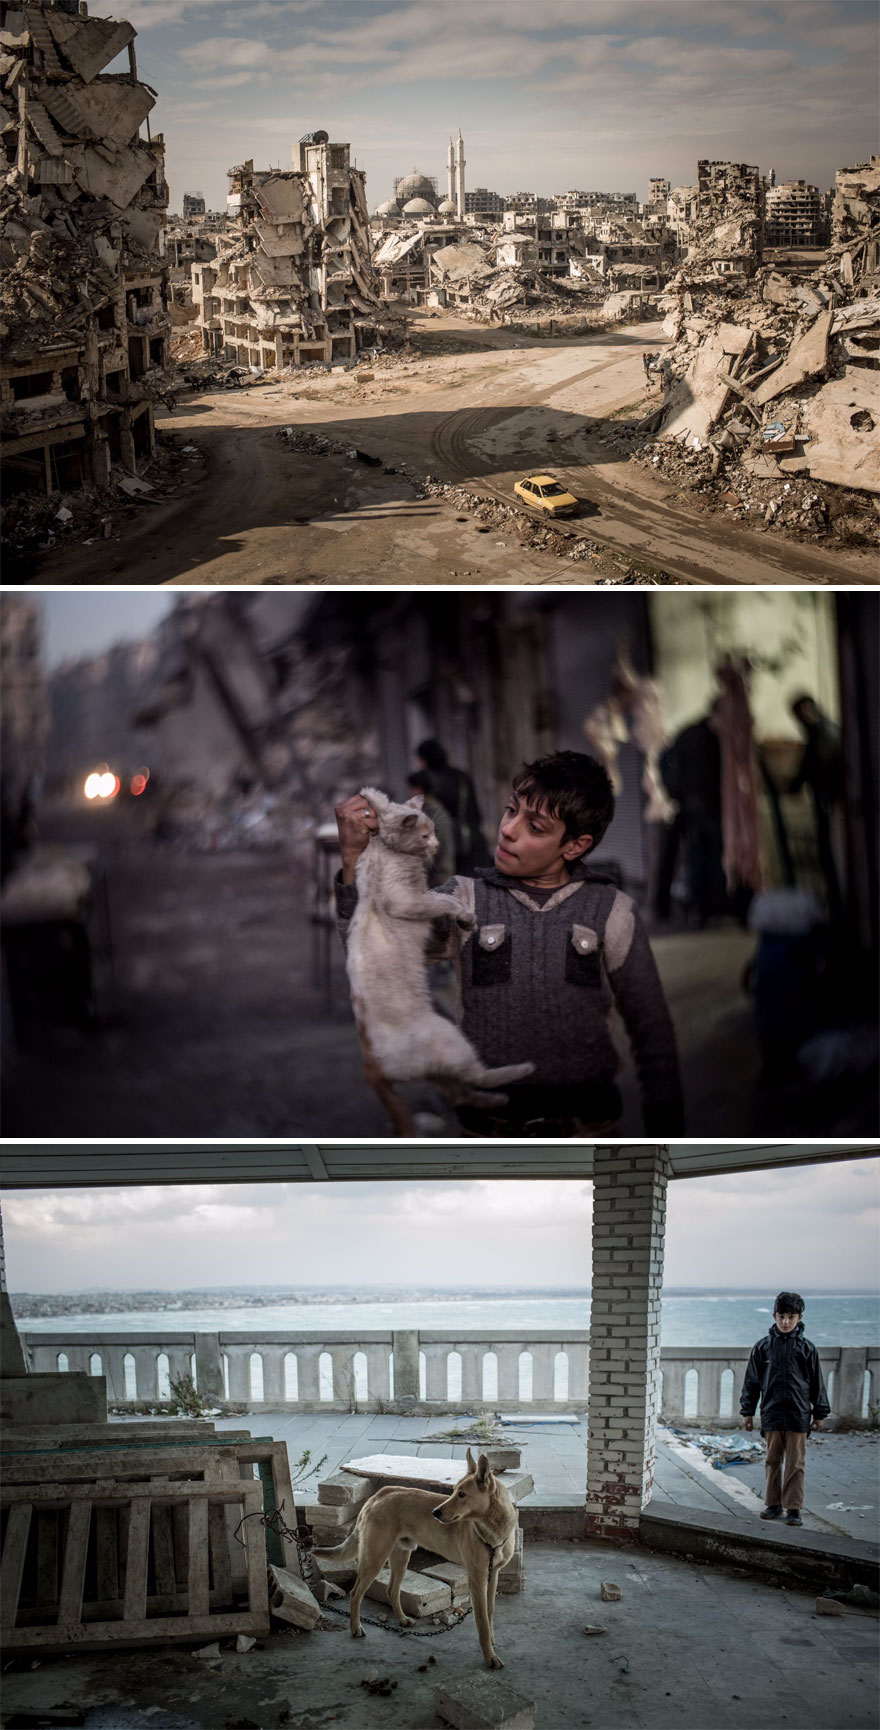 Road To Ruin, Syria (2nd Place In Story-Telling Category)